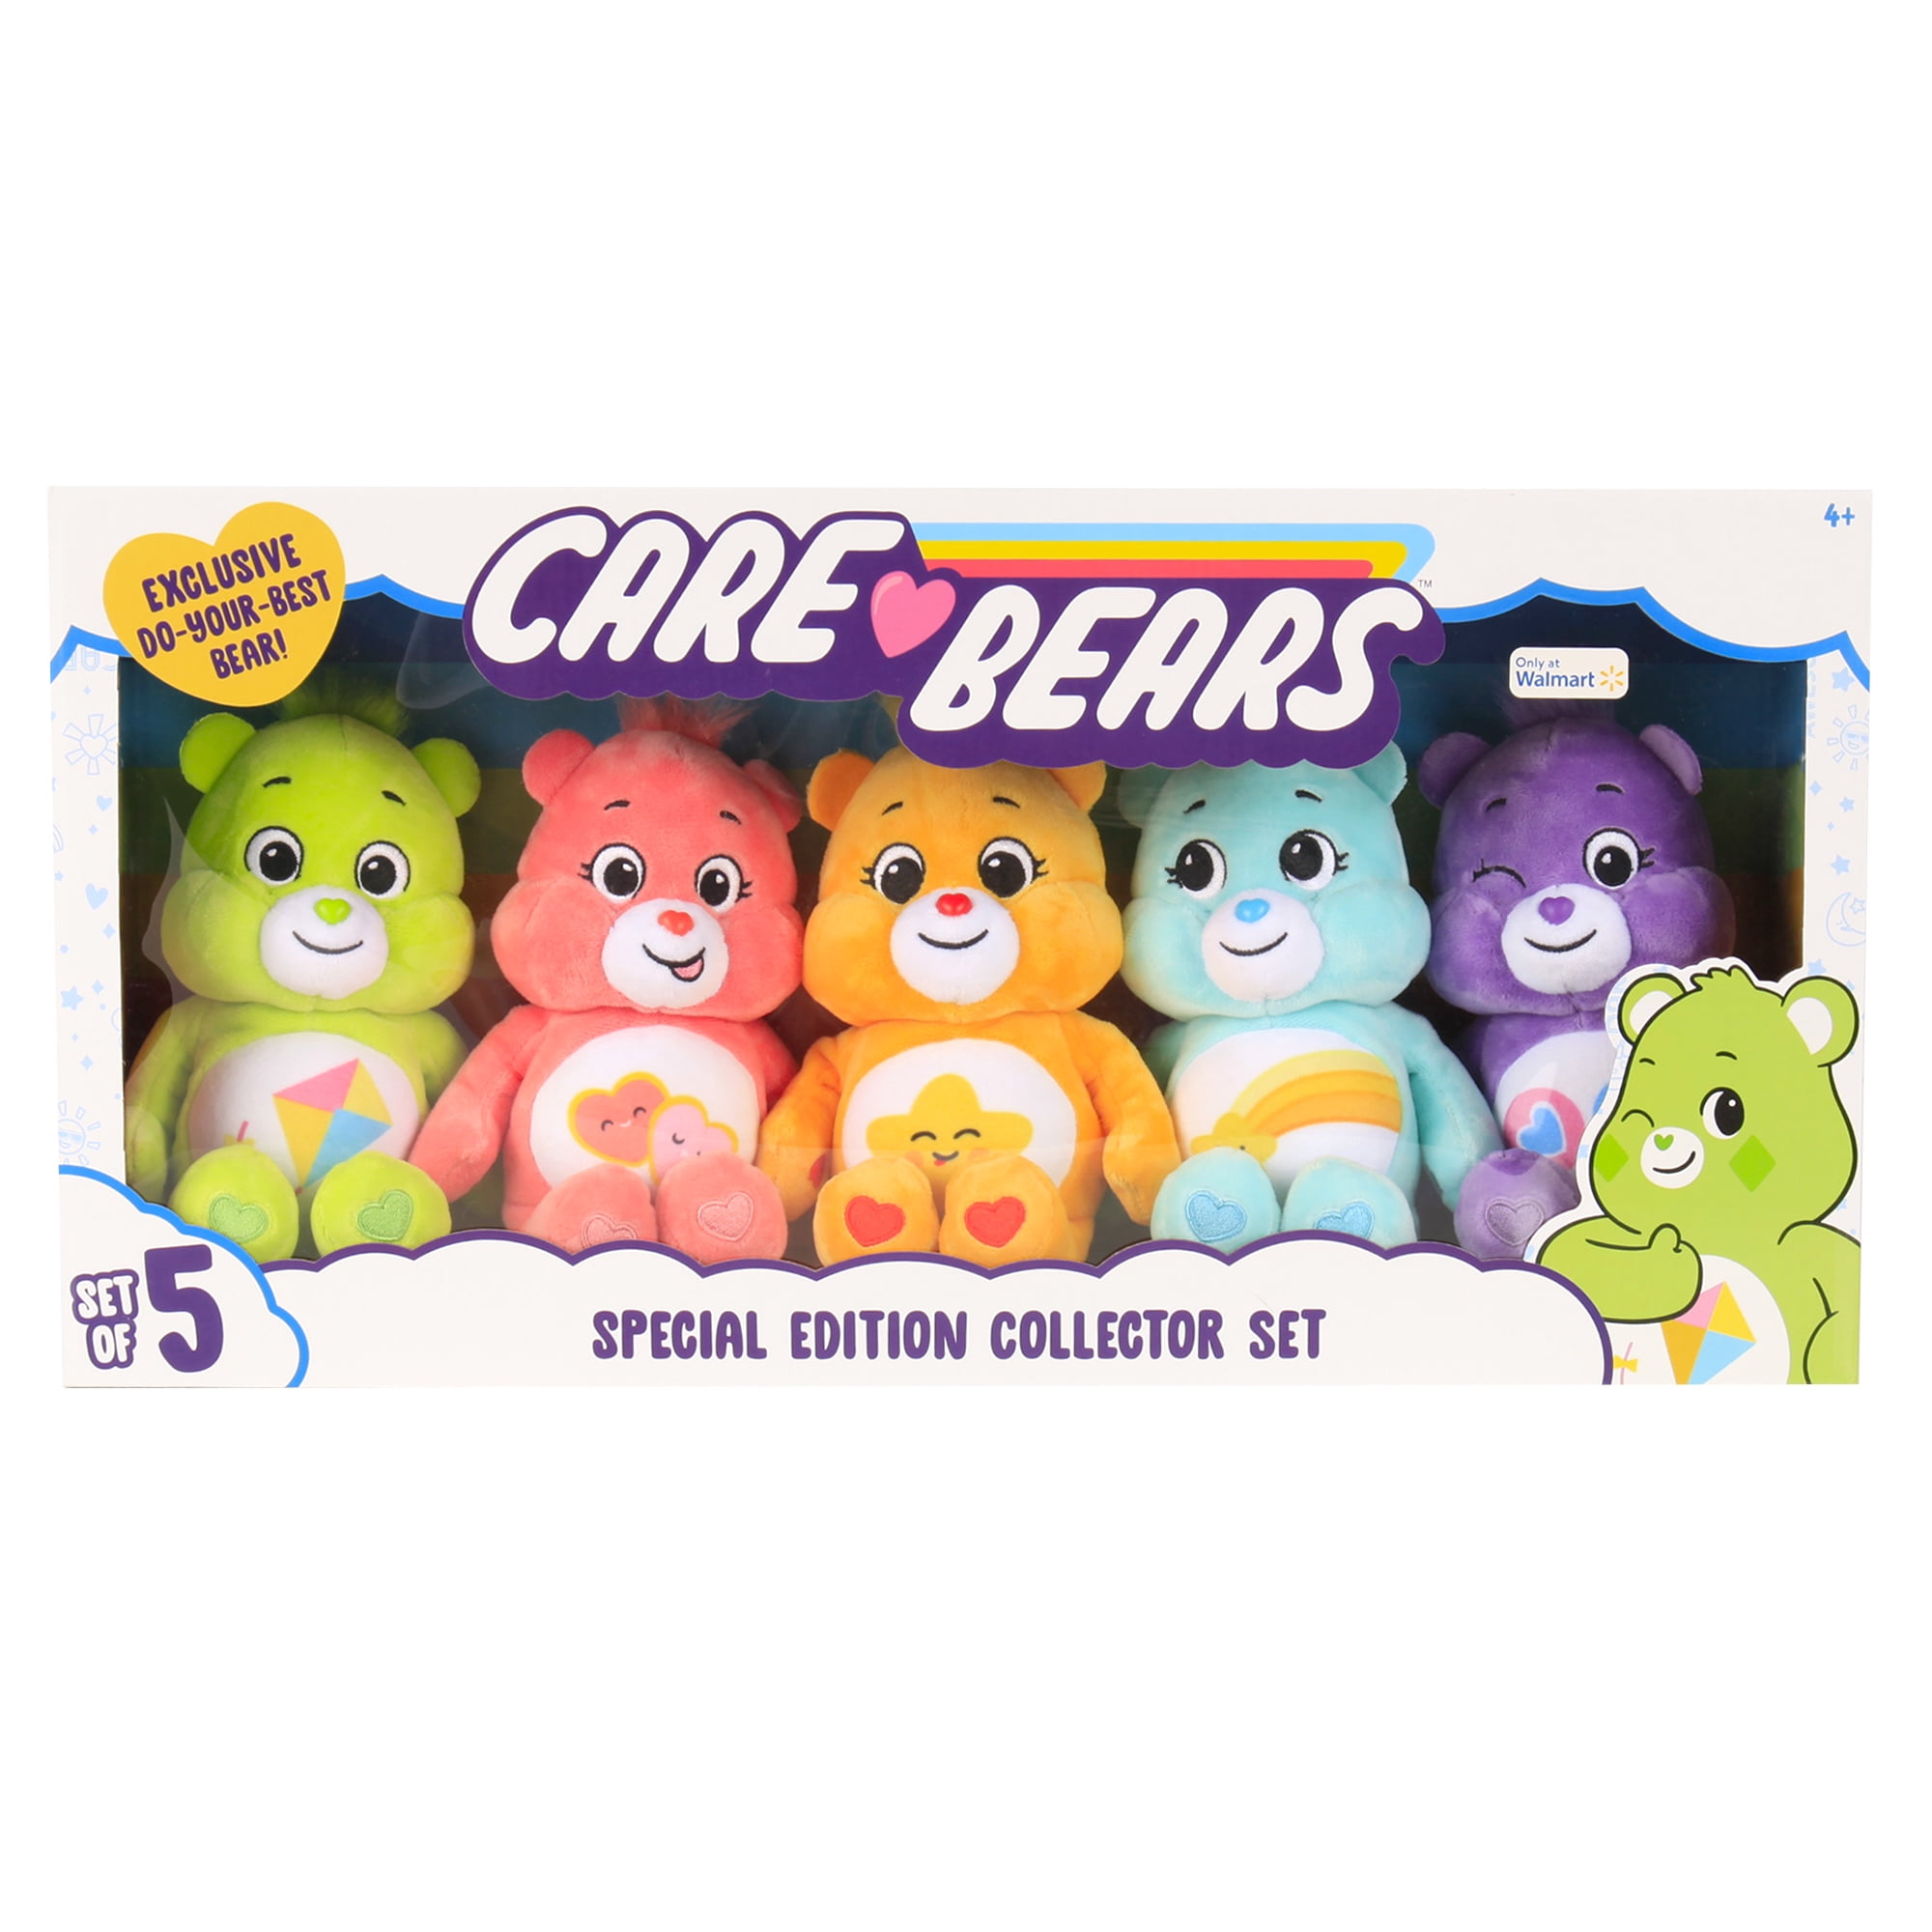 CARE BEARS 2020 9" Plush SPECIAL EDITION COLLECTOR SET Exclusive HARMONY BEAR 